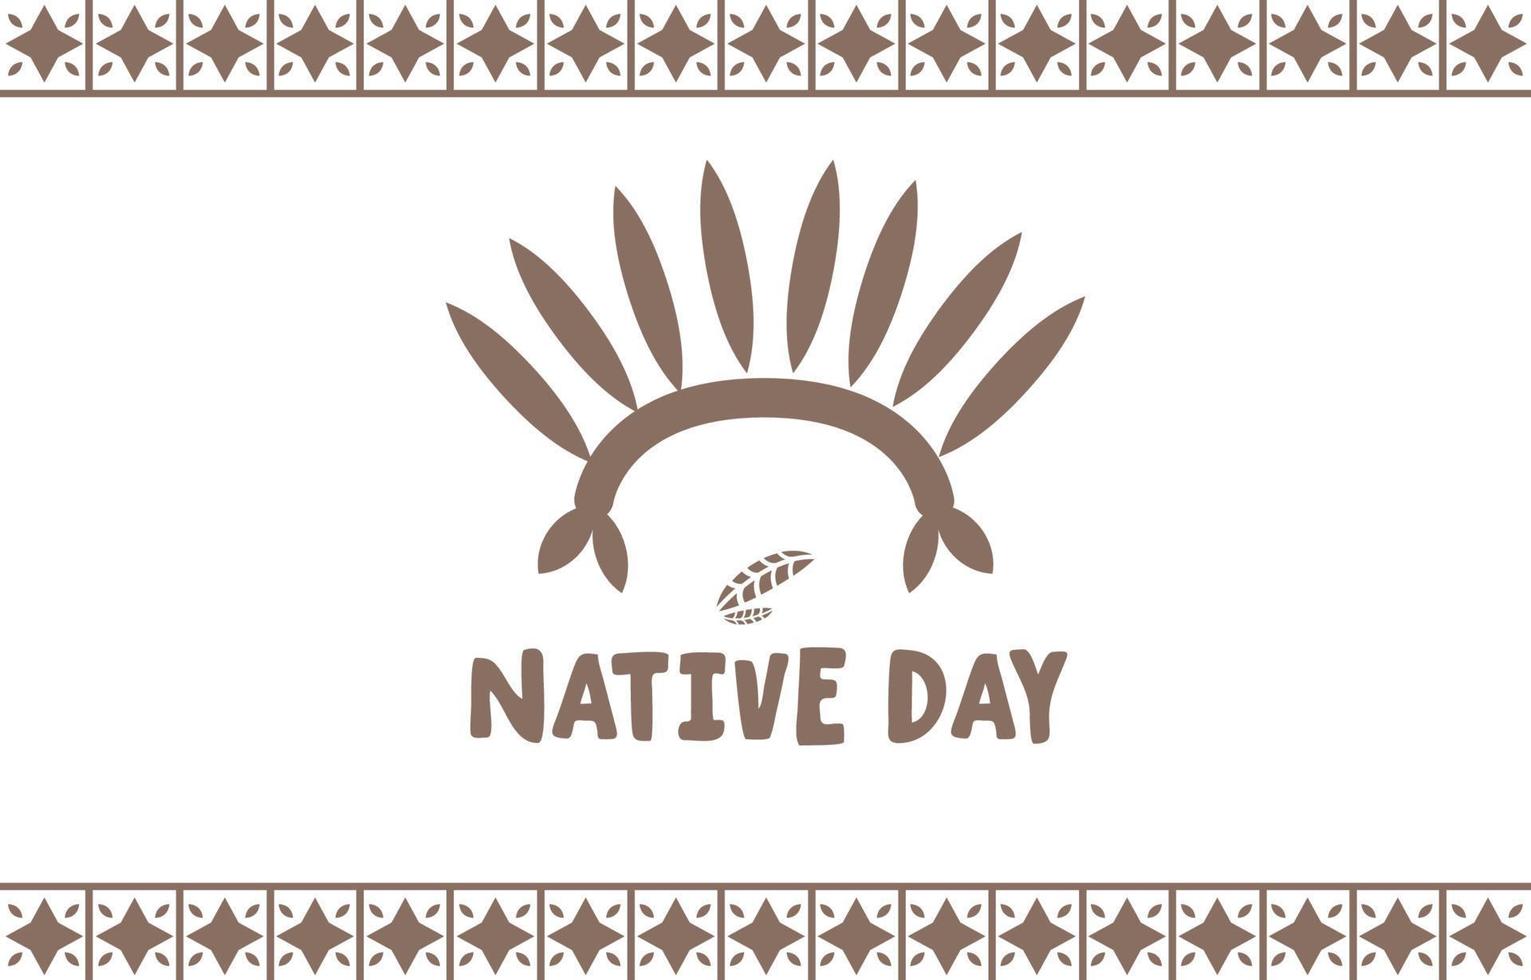 Simple Illustration of native day, good for background, wallpaper, gift card etc vector